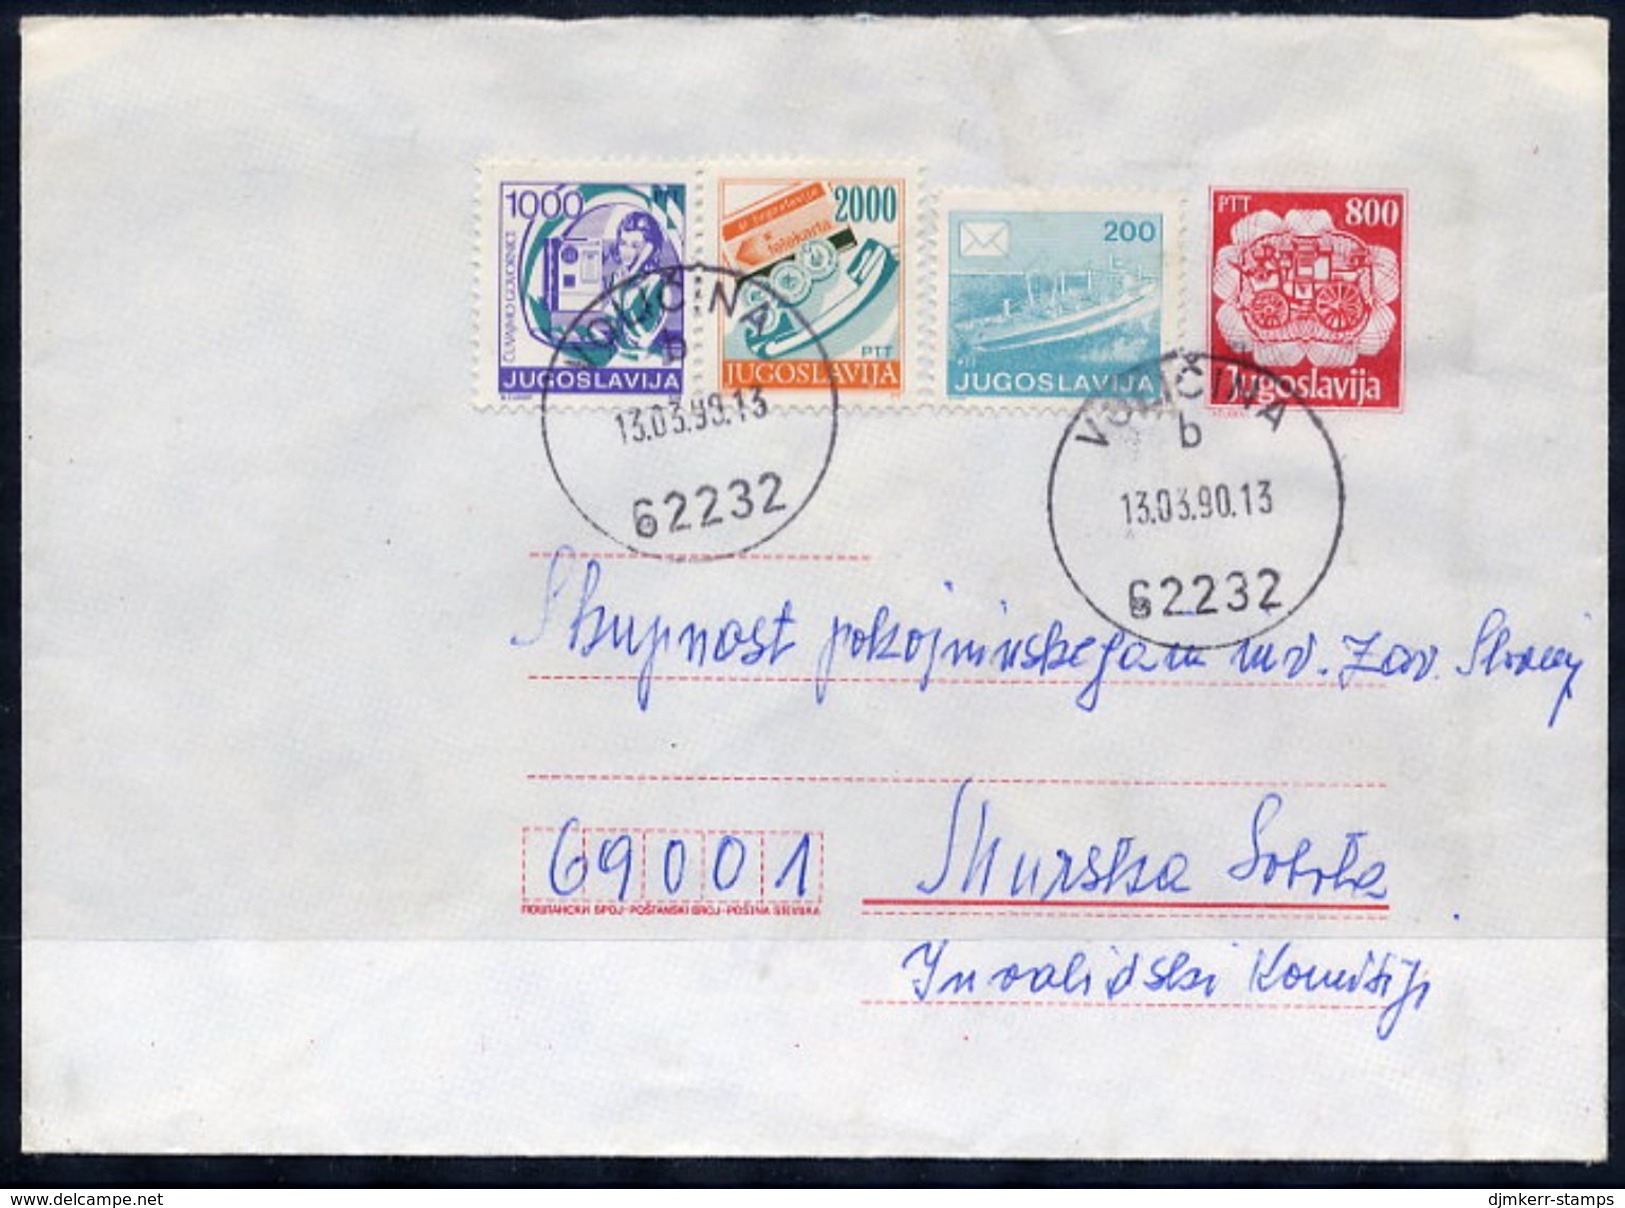 YUGOSLAVIA 1989 Mailcoach 800 D. Envelope Used With Additional Franking.  Michel U91 - Entiers Postaux